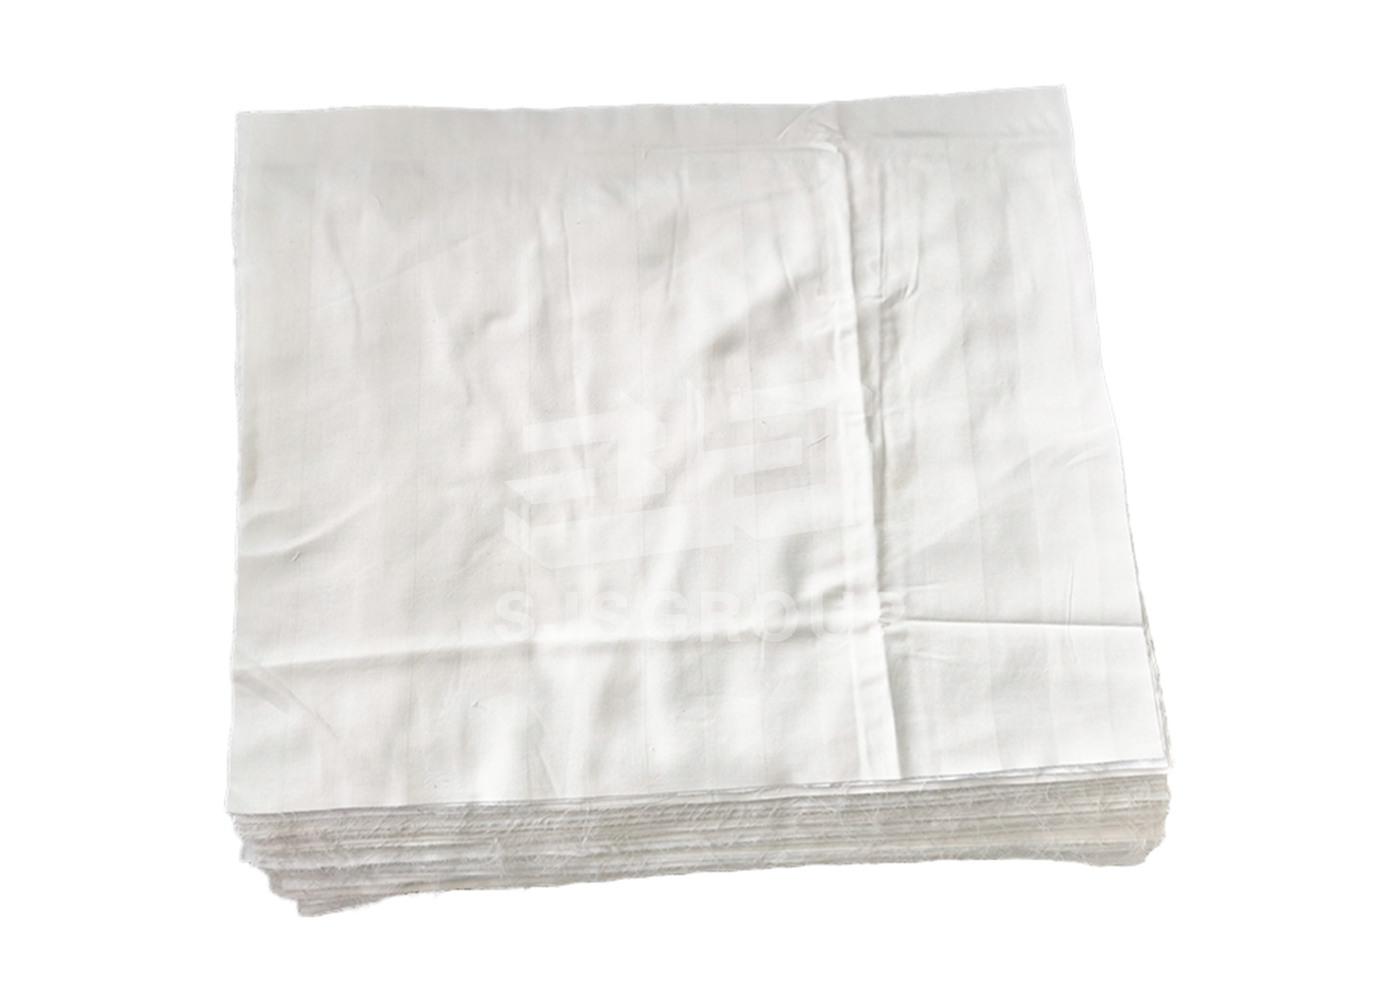 White Bed Sheet Rags-White Bed Sheet Cotton Rags (Standard Size)